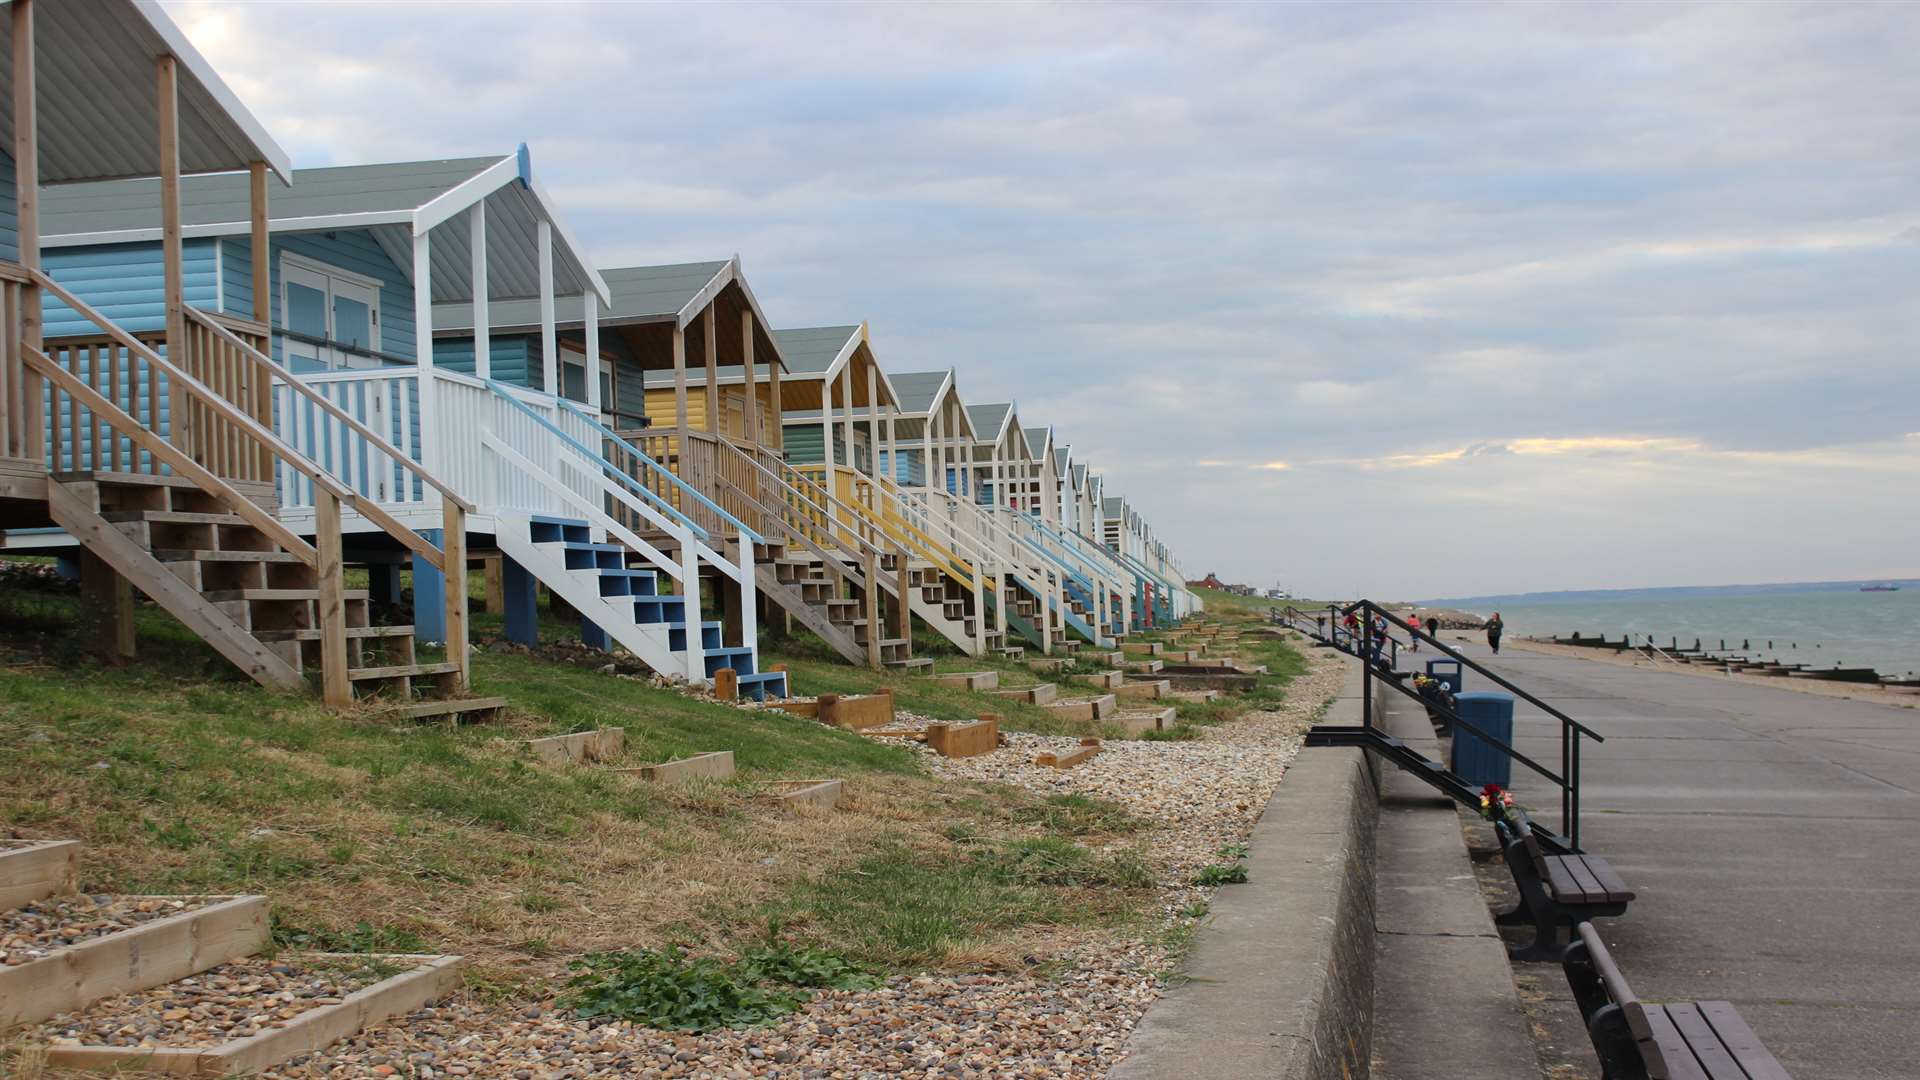 Beach huts at The Leas, Minster, on the Isle of Sheppey